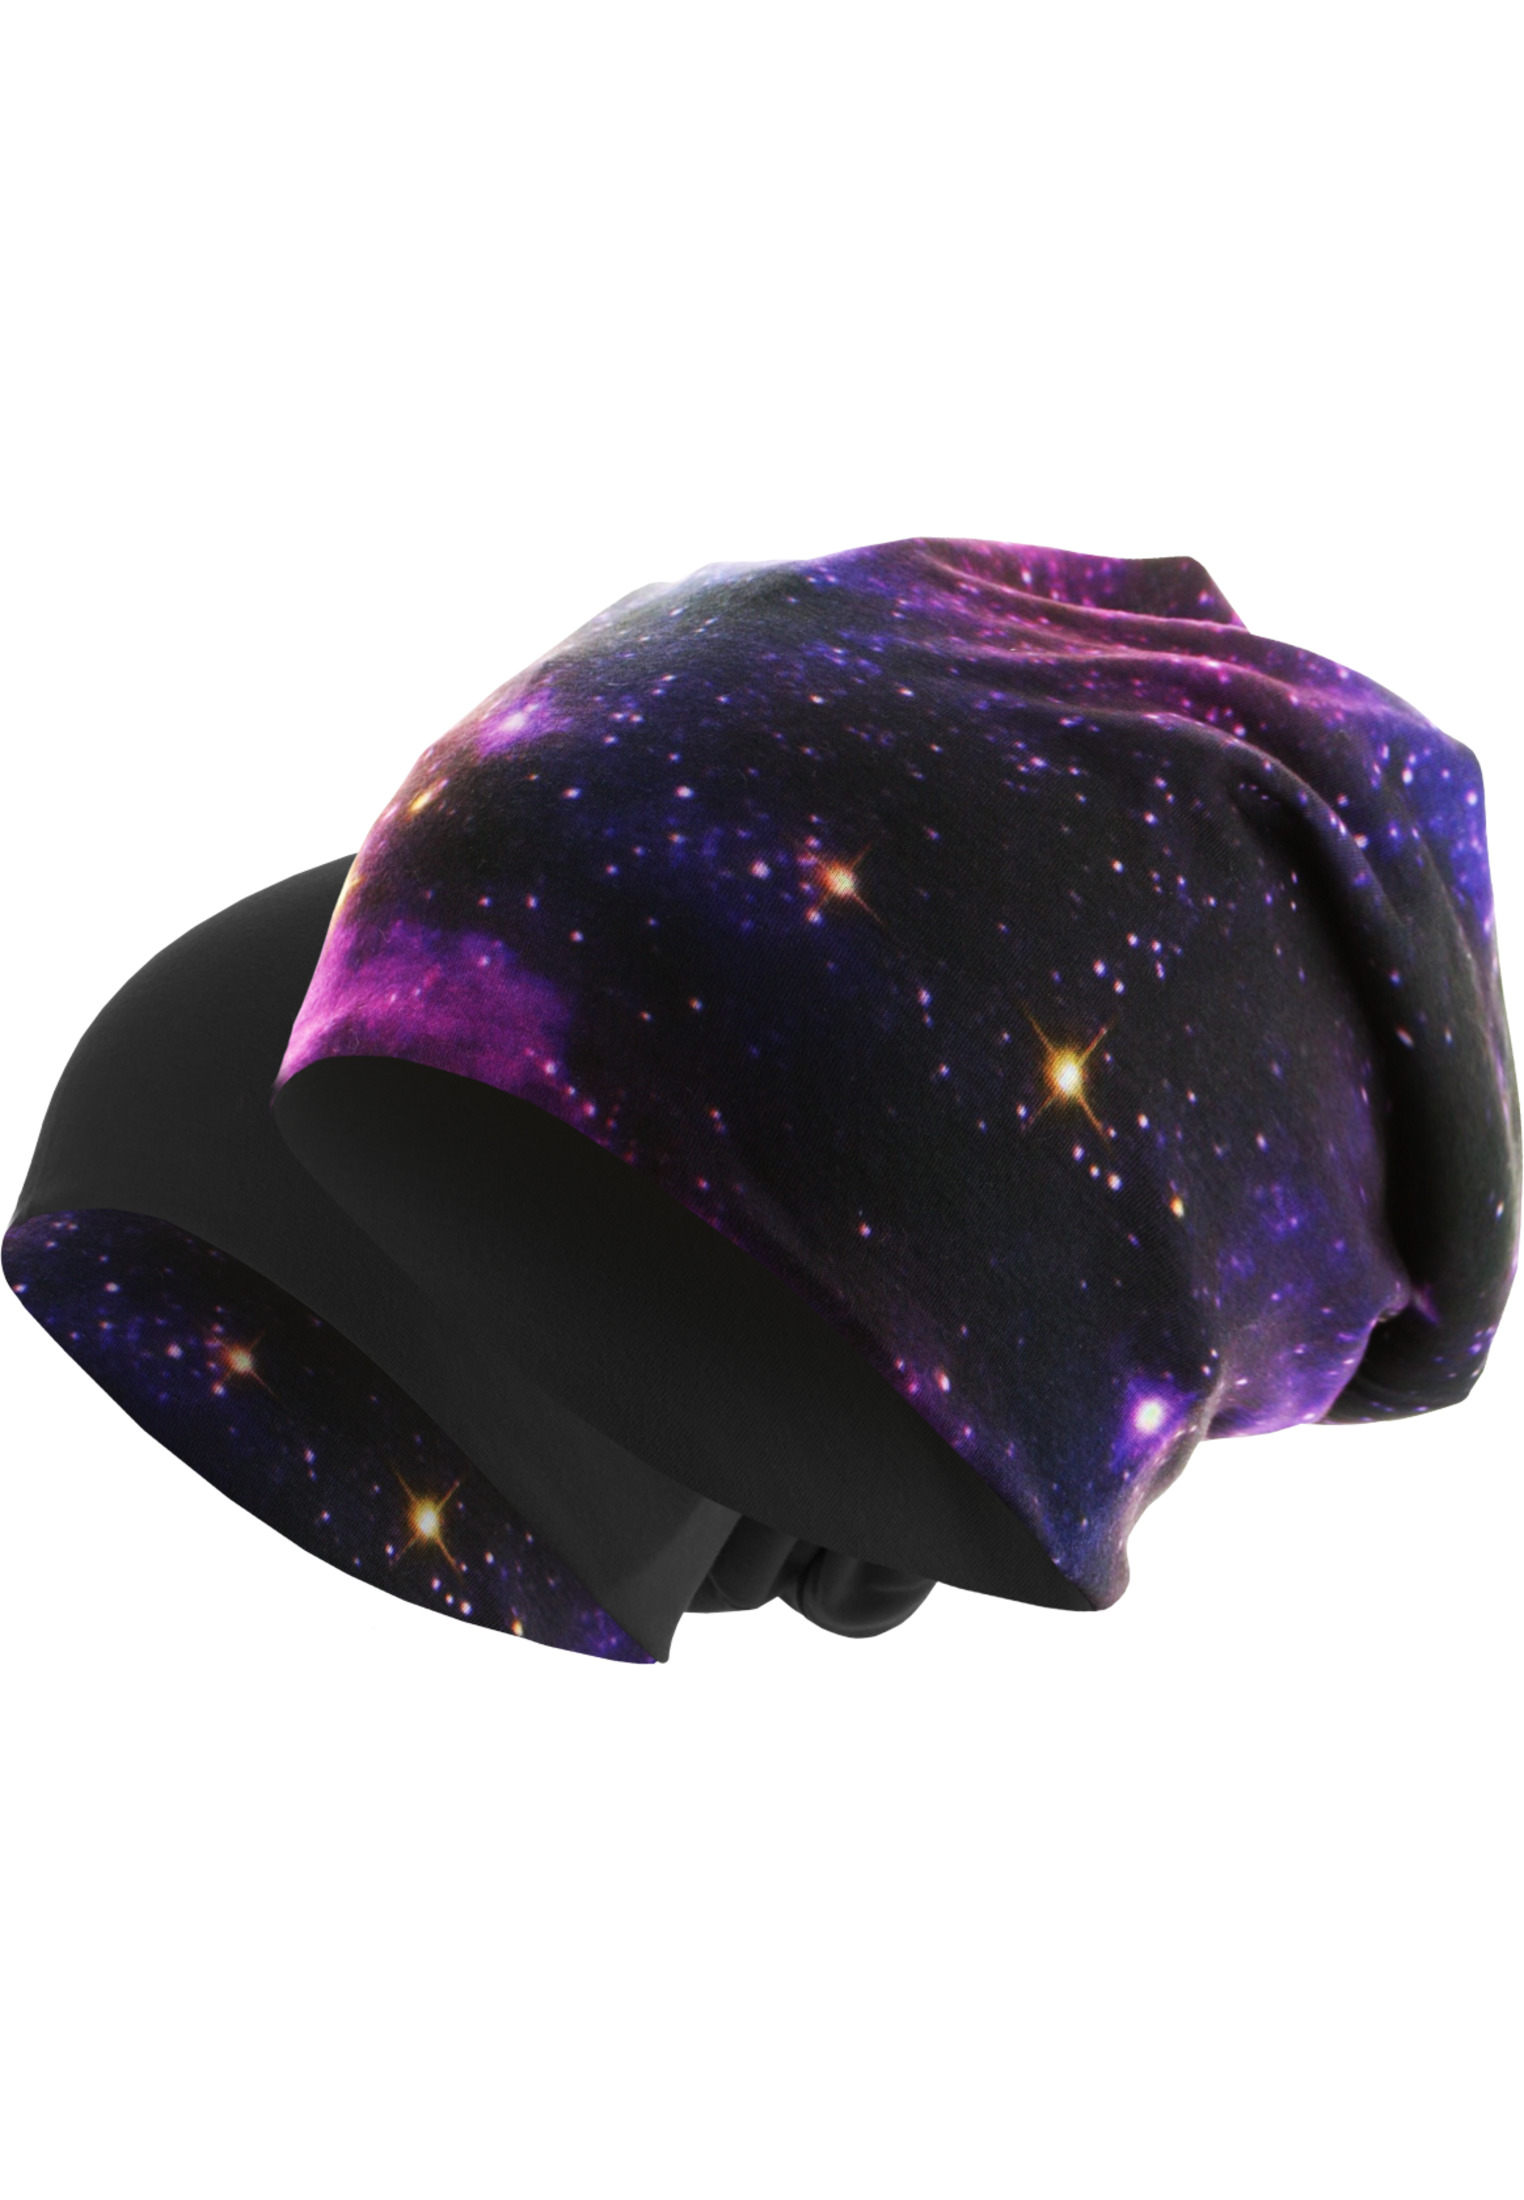 Caps & Beanies Printed Jersey Beanie in Farbe galaxy/black